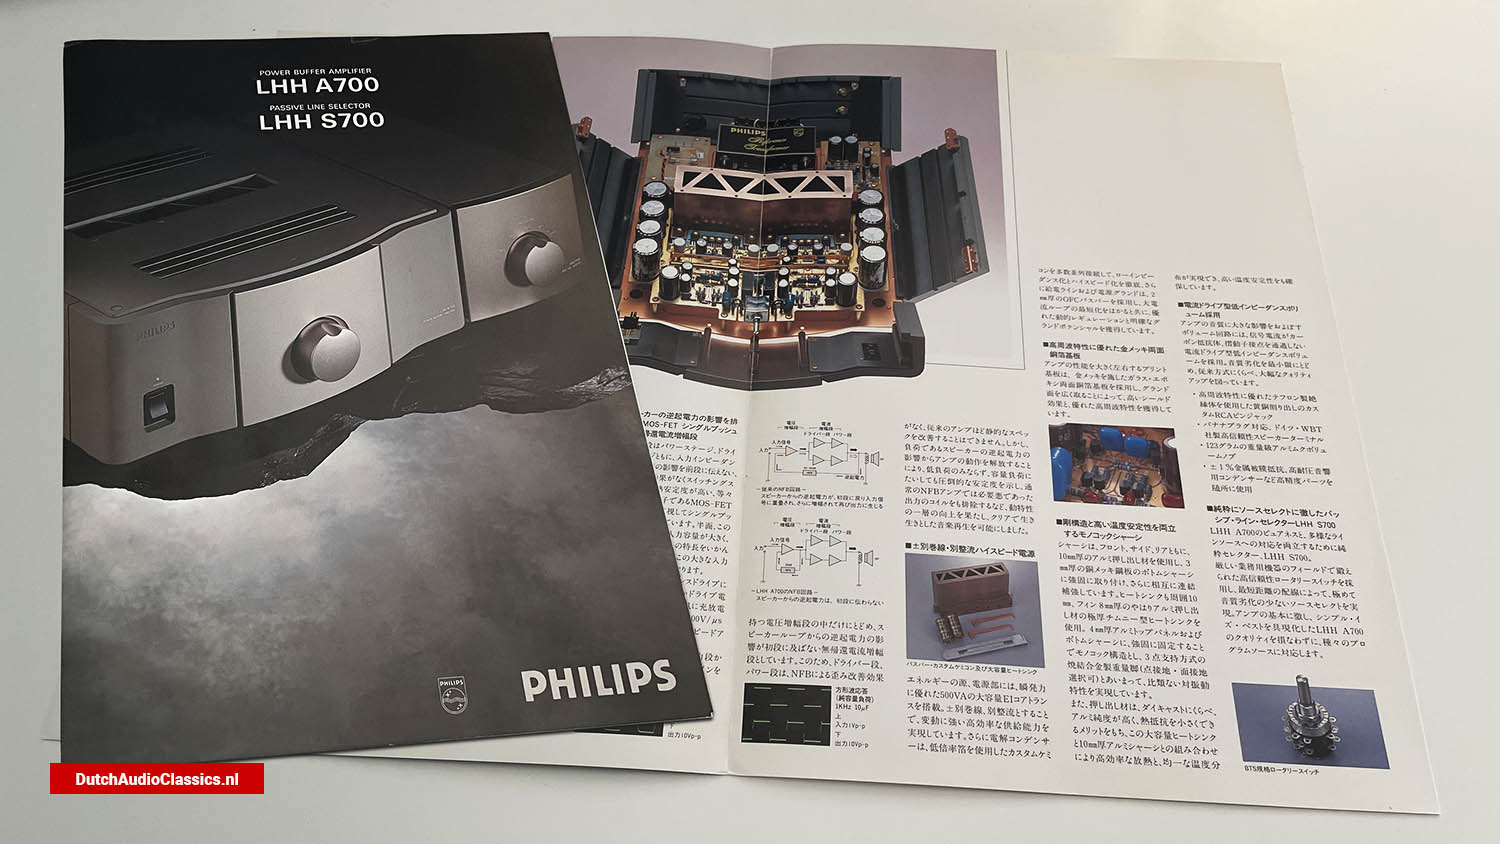 Philips LHH A700 S700 1994 brochure